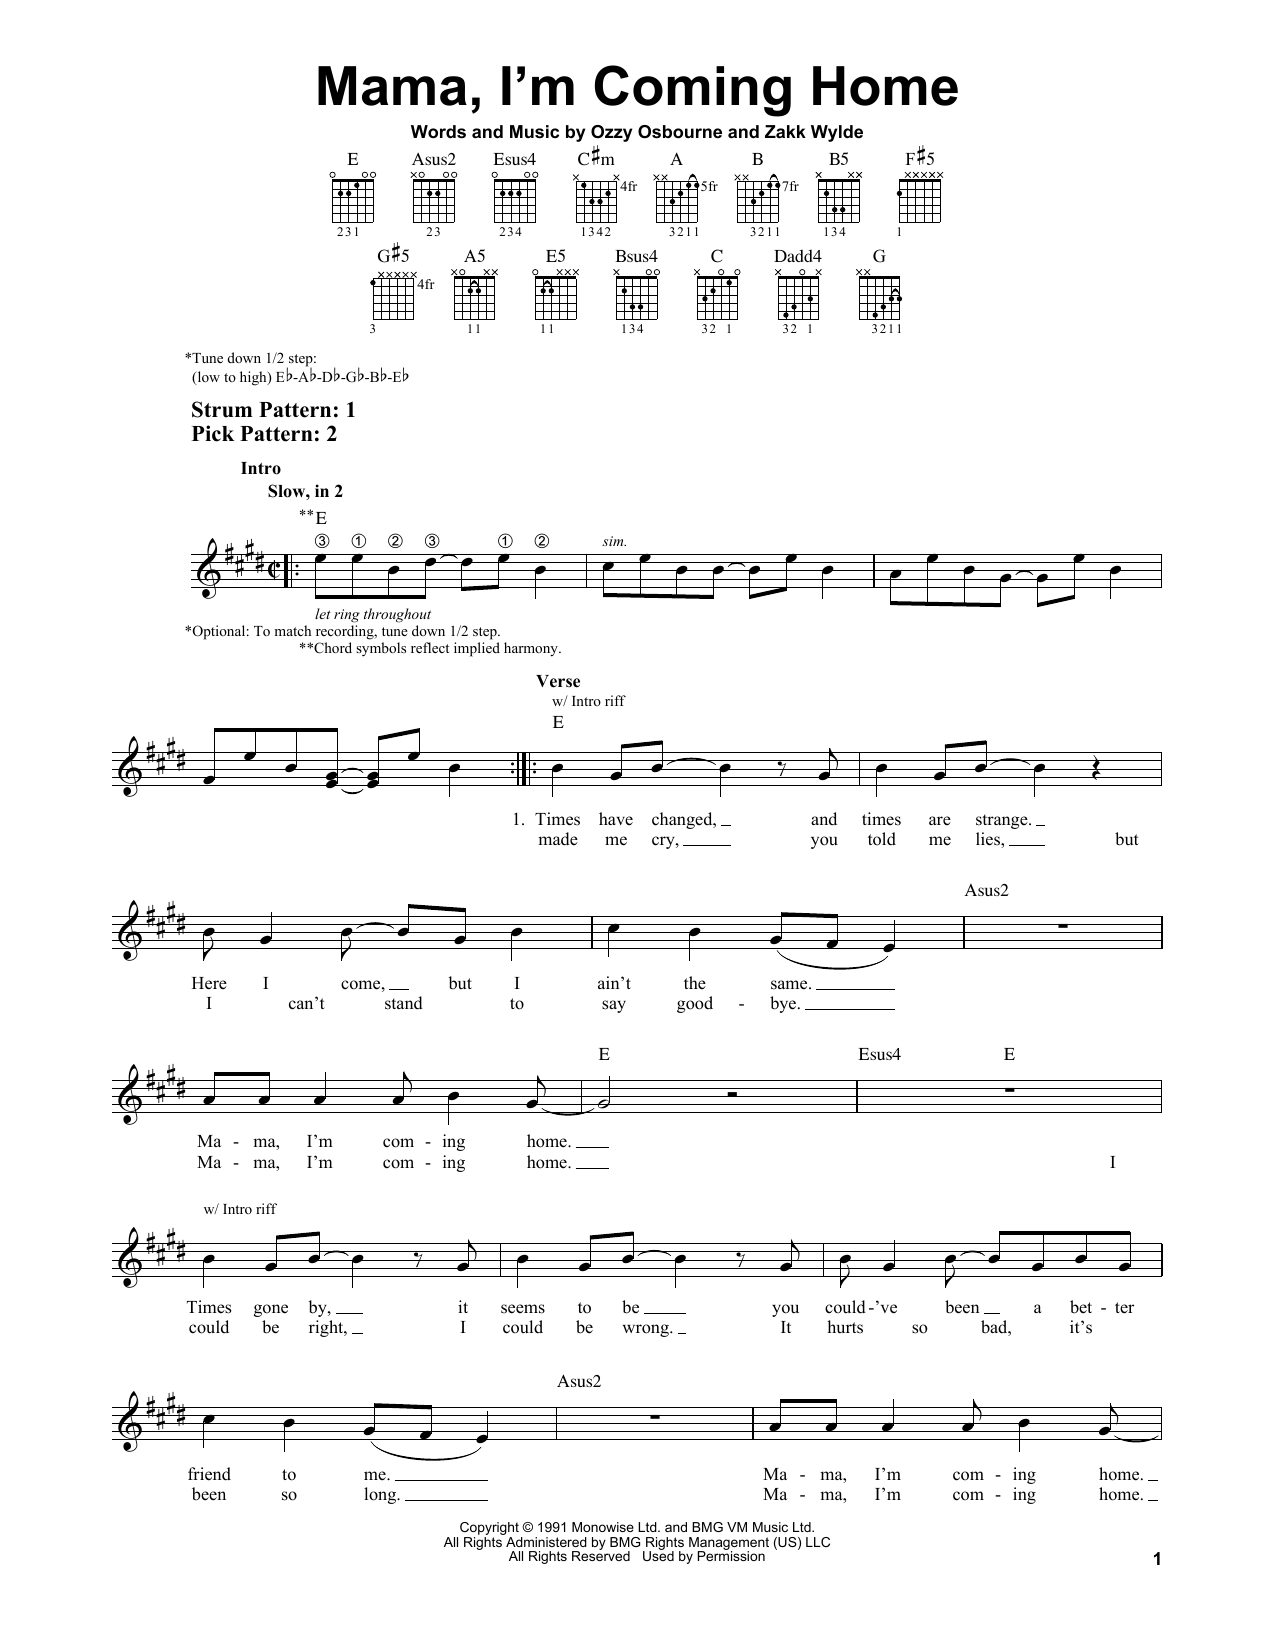 Download Ozzy Osbourne Mama, I'm Coming Home Sheet Music